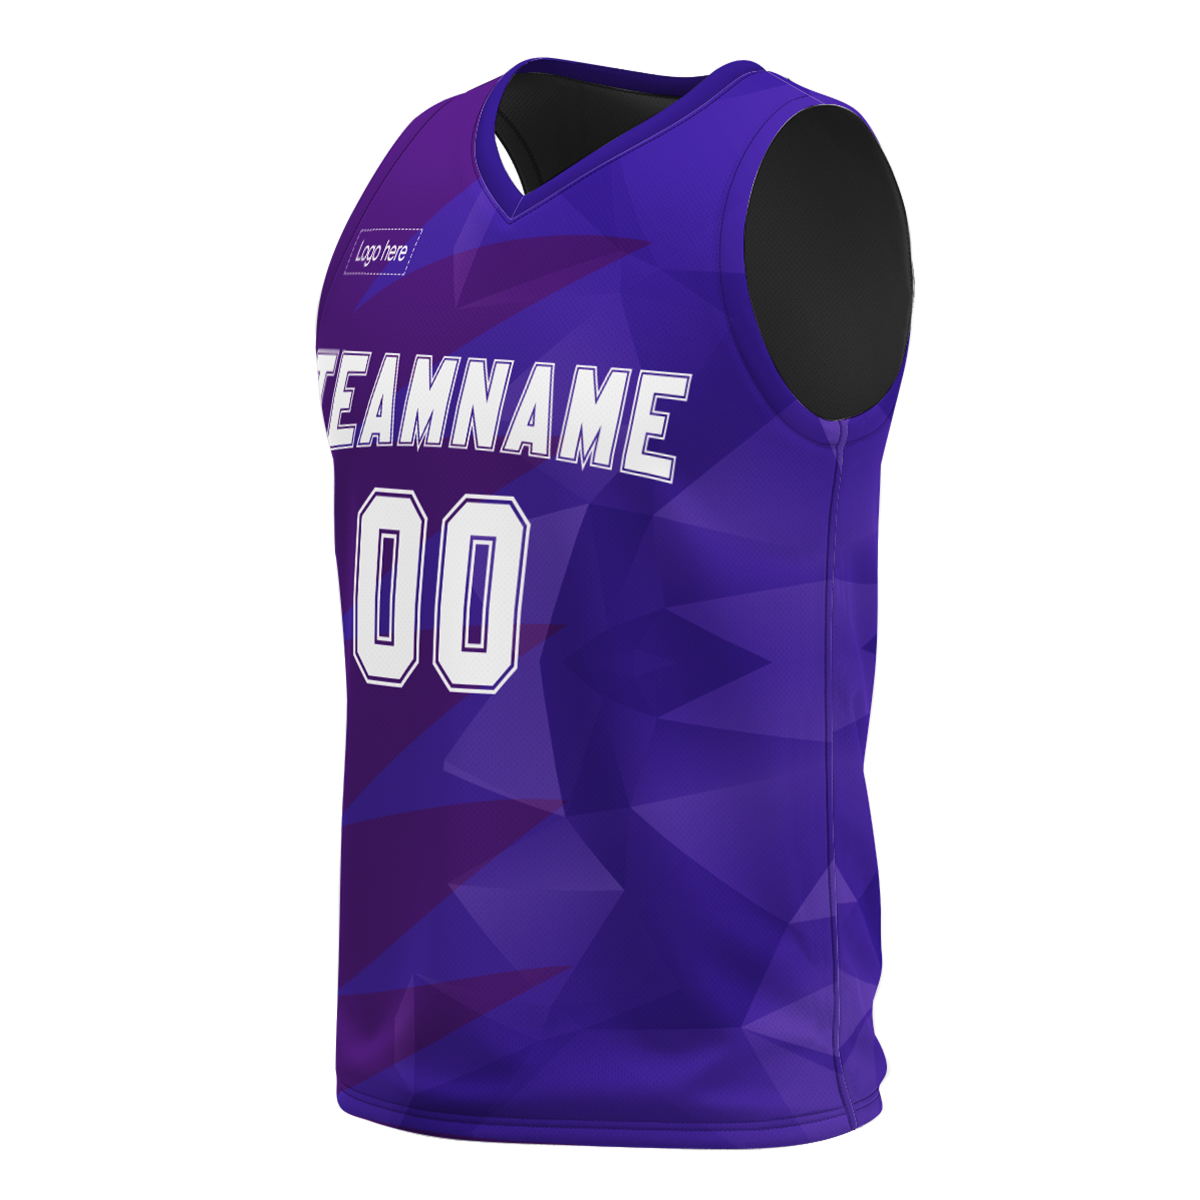 factory-custom-polyester-sublimation-basketball-jersey-shirts-printing-logo-basketball-suits-for-men-women-at-cj-pod-5